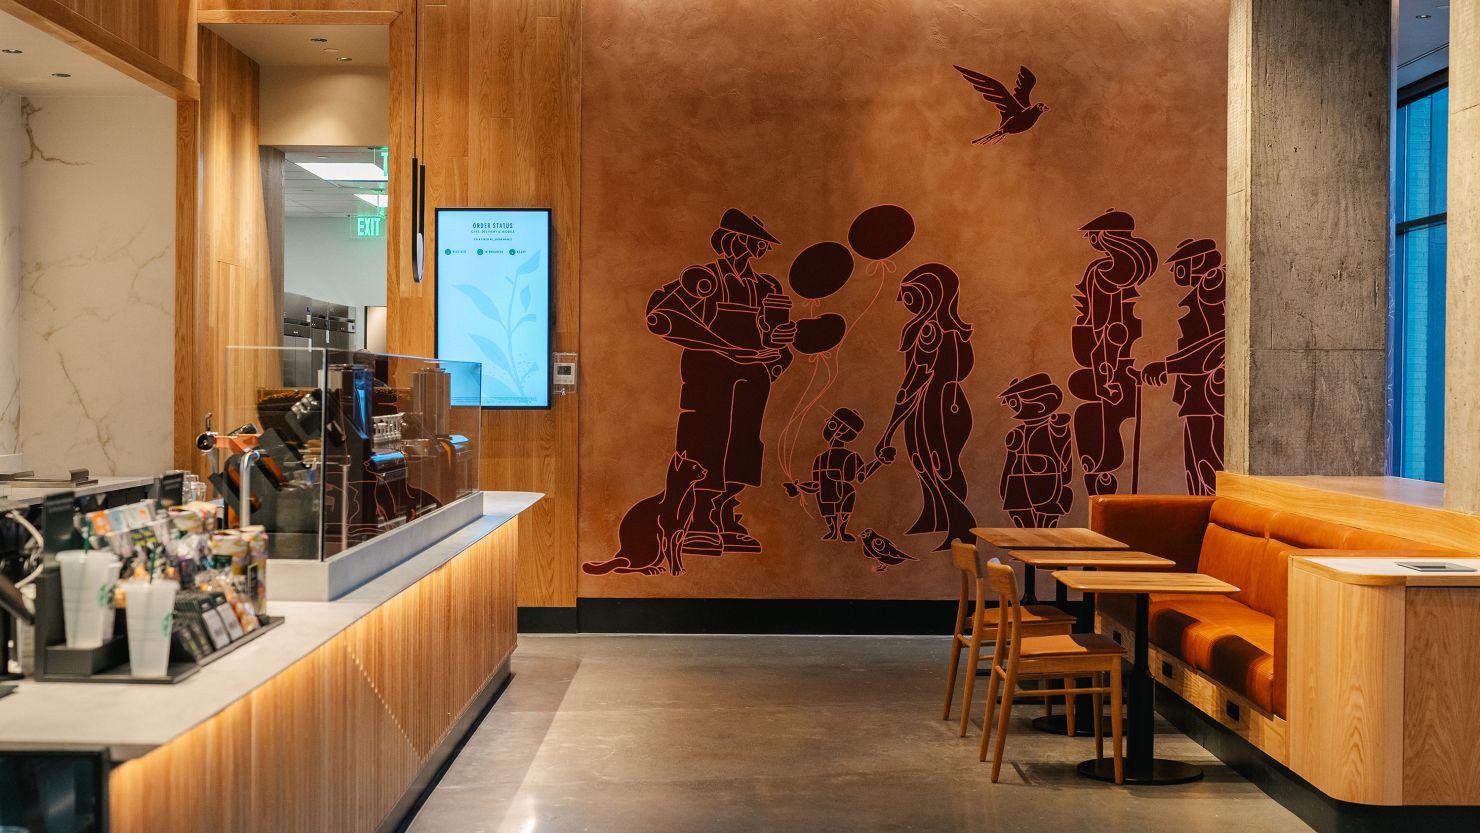 Front of house and mural at the Starbucks Union Market location in Washington, DC.